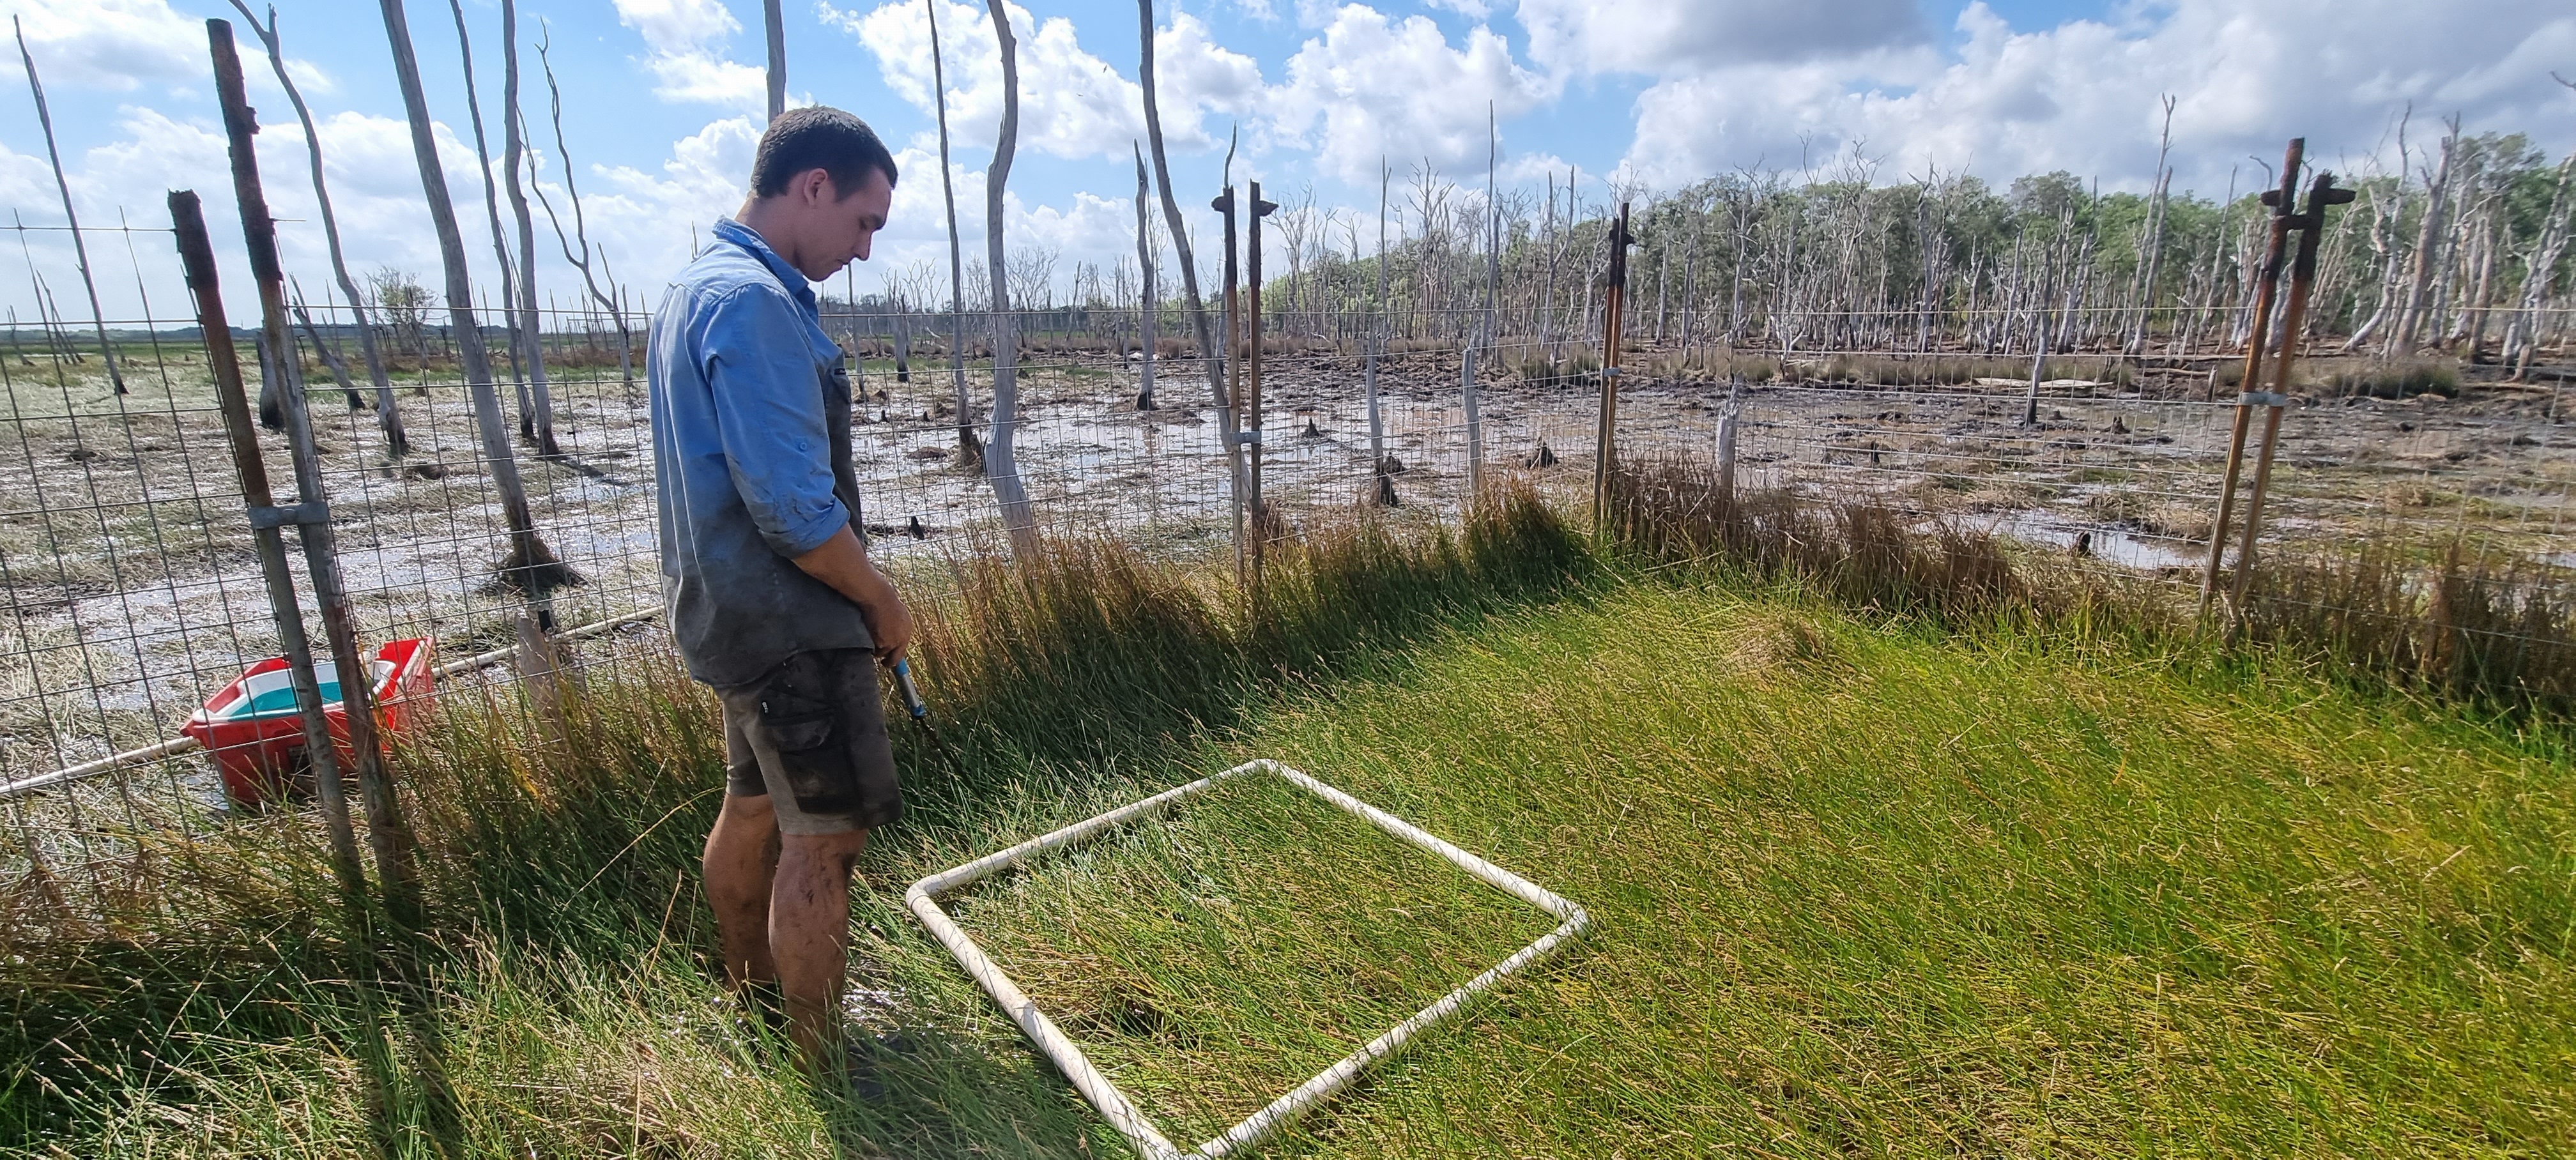 Wetland vegetation recovery within feral ungulate exclusion plots